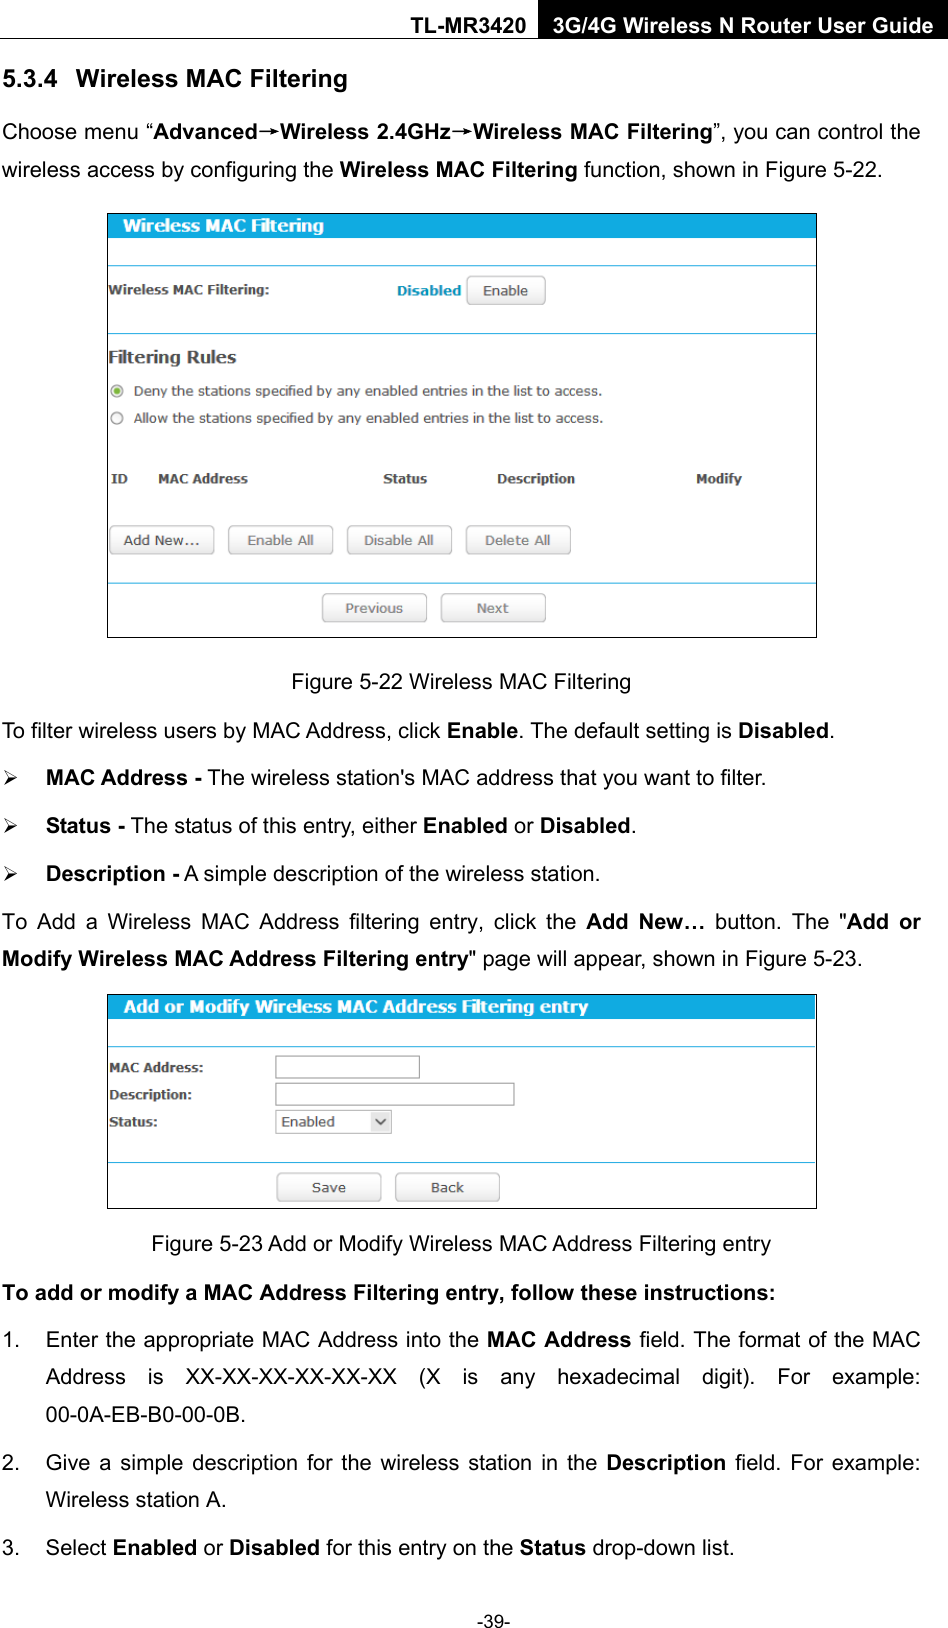    -39- TL-MR3420 3G/4G Wireless N Router User Guide 5.3.4 Wireless MAC Filtering  Choose menu “Advanced→Wireless 2.4GHz→Wireless MAC Filtering”, you can control the wireless access by configuring the Wireless MAC Filtering function, shown in Figure 5-22.  Figure 5-22 Wireless MAC Filtering To filter wireless users by MAC Address, click Enable. The default setting is Disabled.  MAC Address - The wireless station&apos;s MAC address that you want to filter.    Status - The status of this entry, either Enabled or Disabled.  Description - A simple description of the wireless station.   To Add a Wireless MAC Address filtering entry, click the  Add New… button. The &quot;Add or Modify Wireless MAC Address Filtering entry&quot; page will appear, shown in Figure 5-23.  Figure 5-23 Add or Modify Wireless MAC Address Filtering entry To add or modify a MAC Address Filtering entry, follow these instructions: 1. Enter the appropriate MAC Address into the MAC Address field. The format of the MAC Address is XX-XX-XX-XX-XX-XX (X is any hexadecimal digit). For example: 00-0A-EB-B0-00-0B.   2. Give a simple description for the wireless station in the Description field. For example: Wireless station A. 3. Select Enabled or Disabled for this entry on the Status drop-down list. 